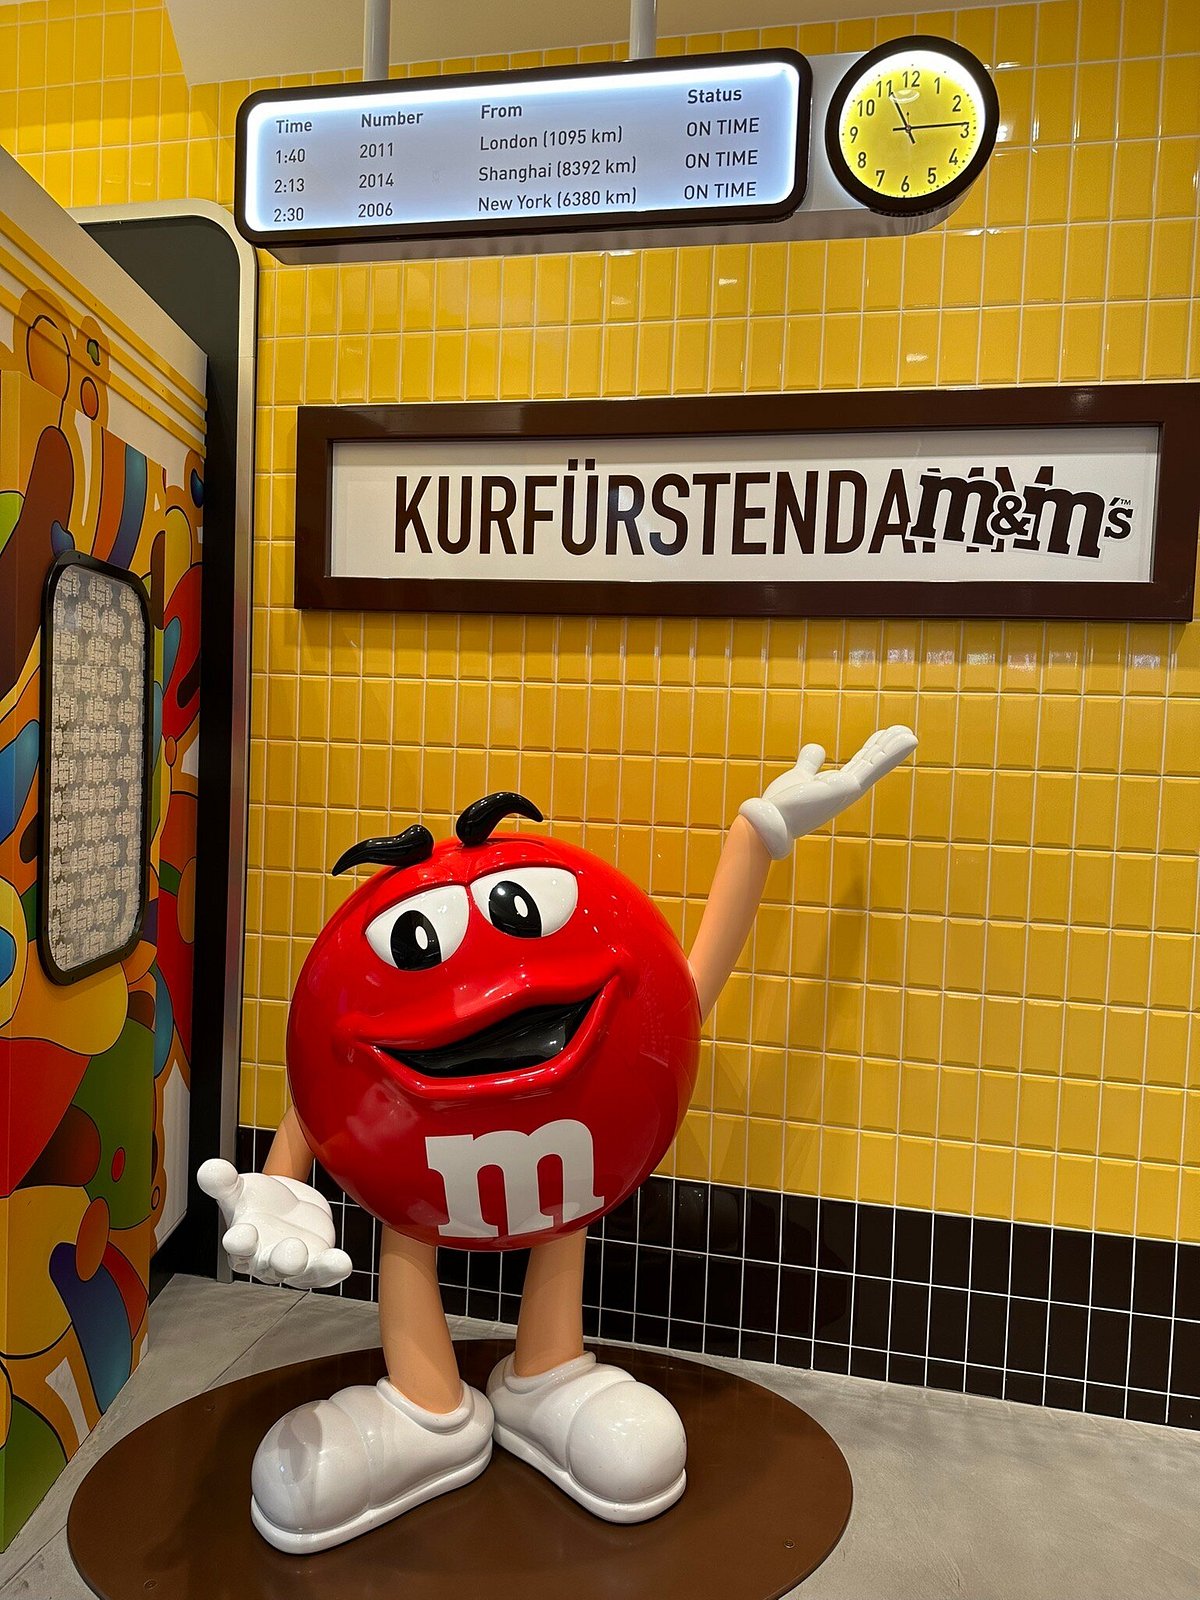 M&M'S brand opens experiential store in Berlin